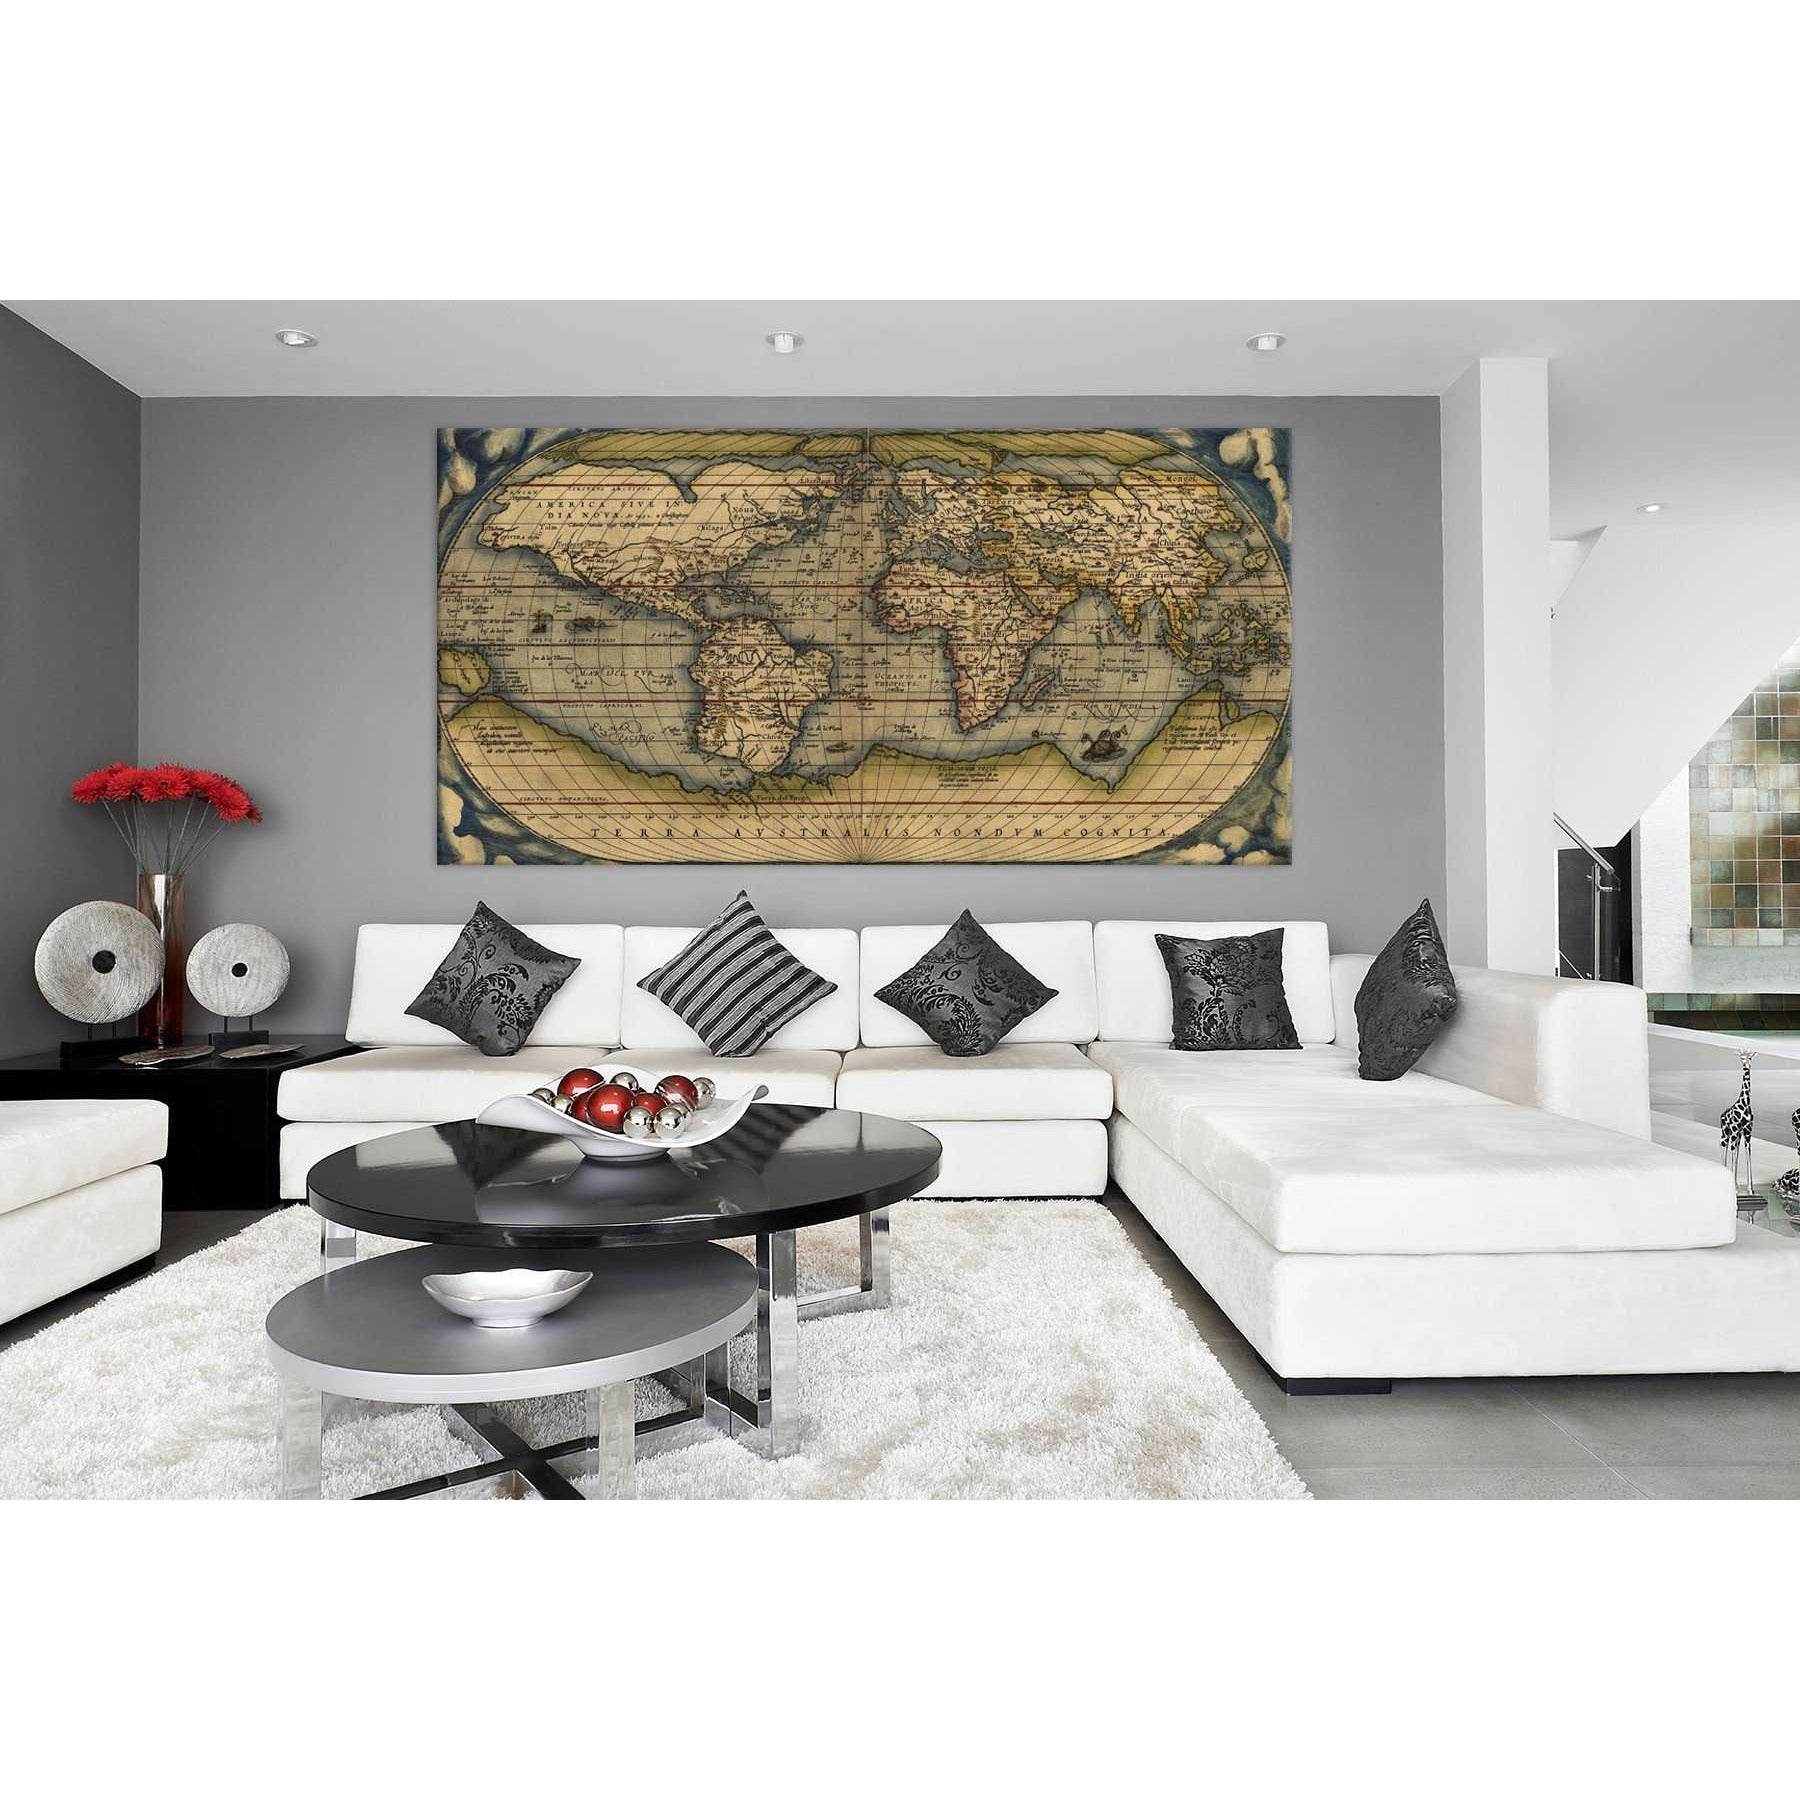 Typus Orbis Terrarum Map Canvas PrintDecorate your walls with a stunning Vintage World Map Canvas Art Print from the world's largest art gallery. Choose from thousands of Vintage artworks with various sizing options. Choose your perfect art print to compl